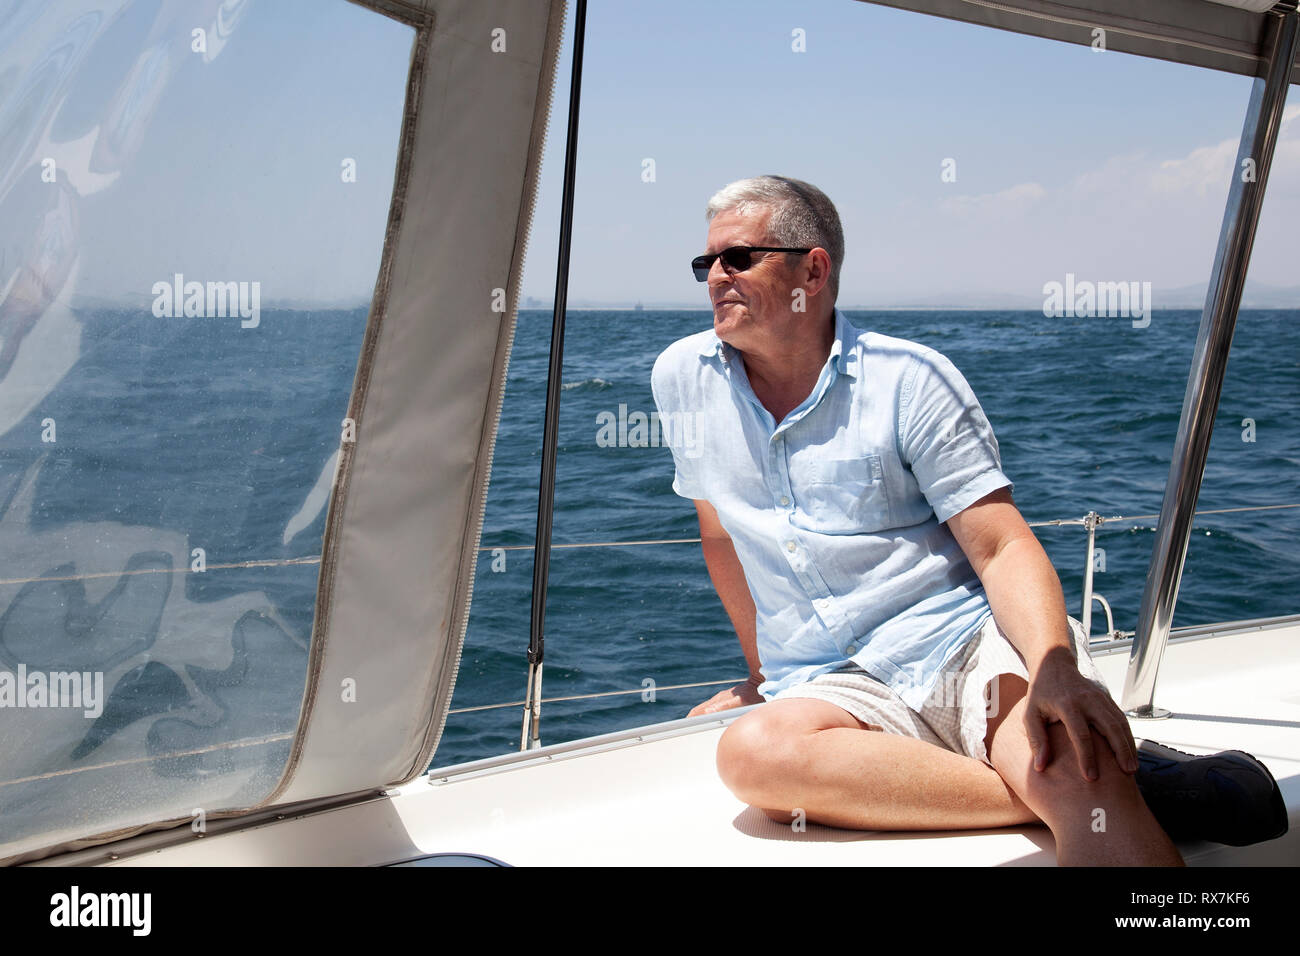 Man on Catamaran at Sea in Table Bay, Cape Town, South Africa Stock Photo